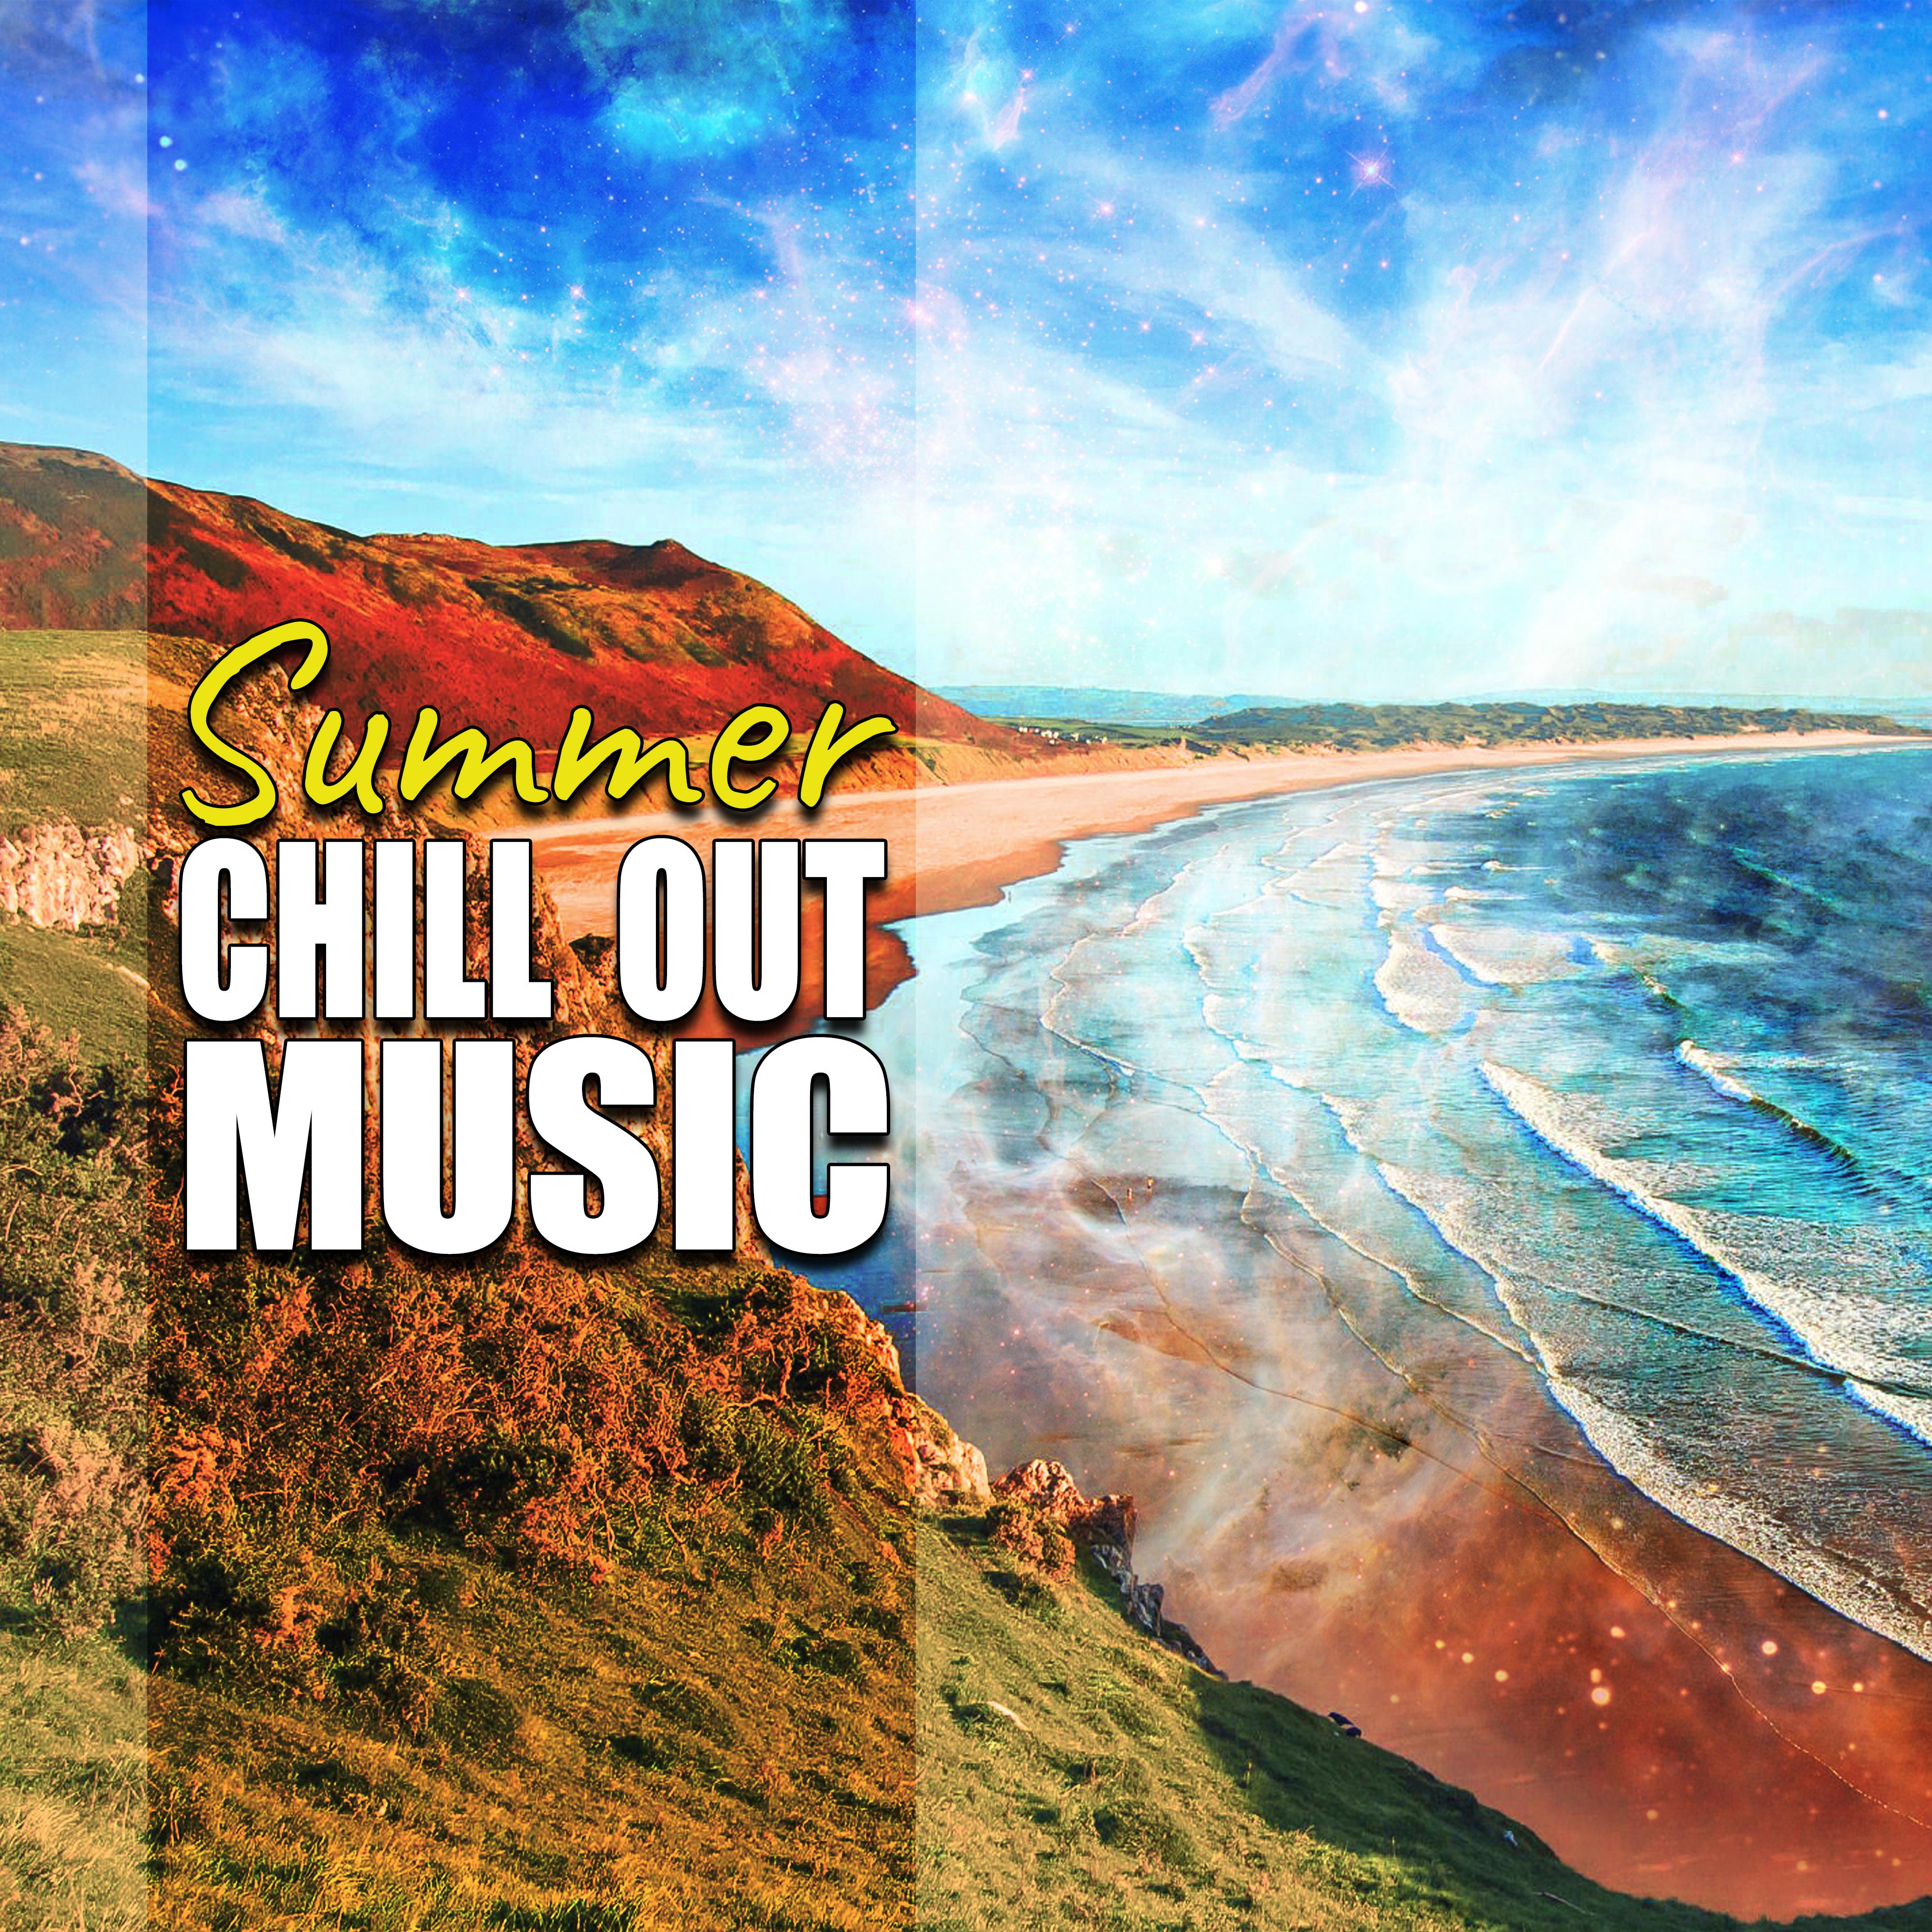 Summer Chill Out Music  Calming Chill Out, Summer Vibes, Holiday Relaxation, Stress Relief